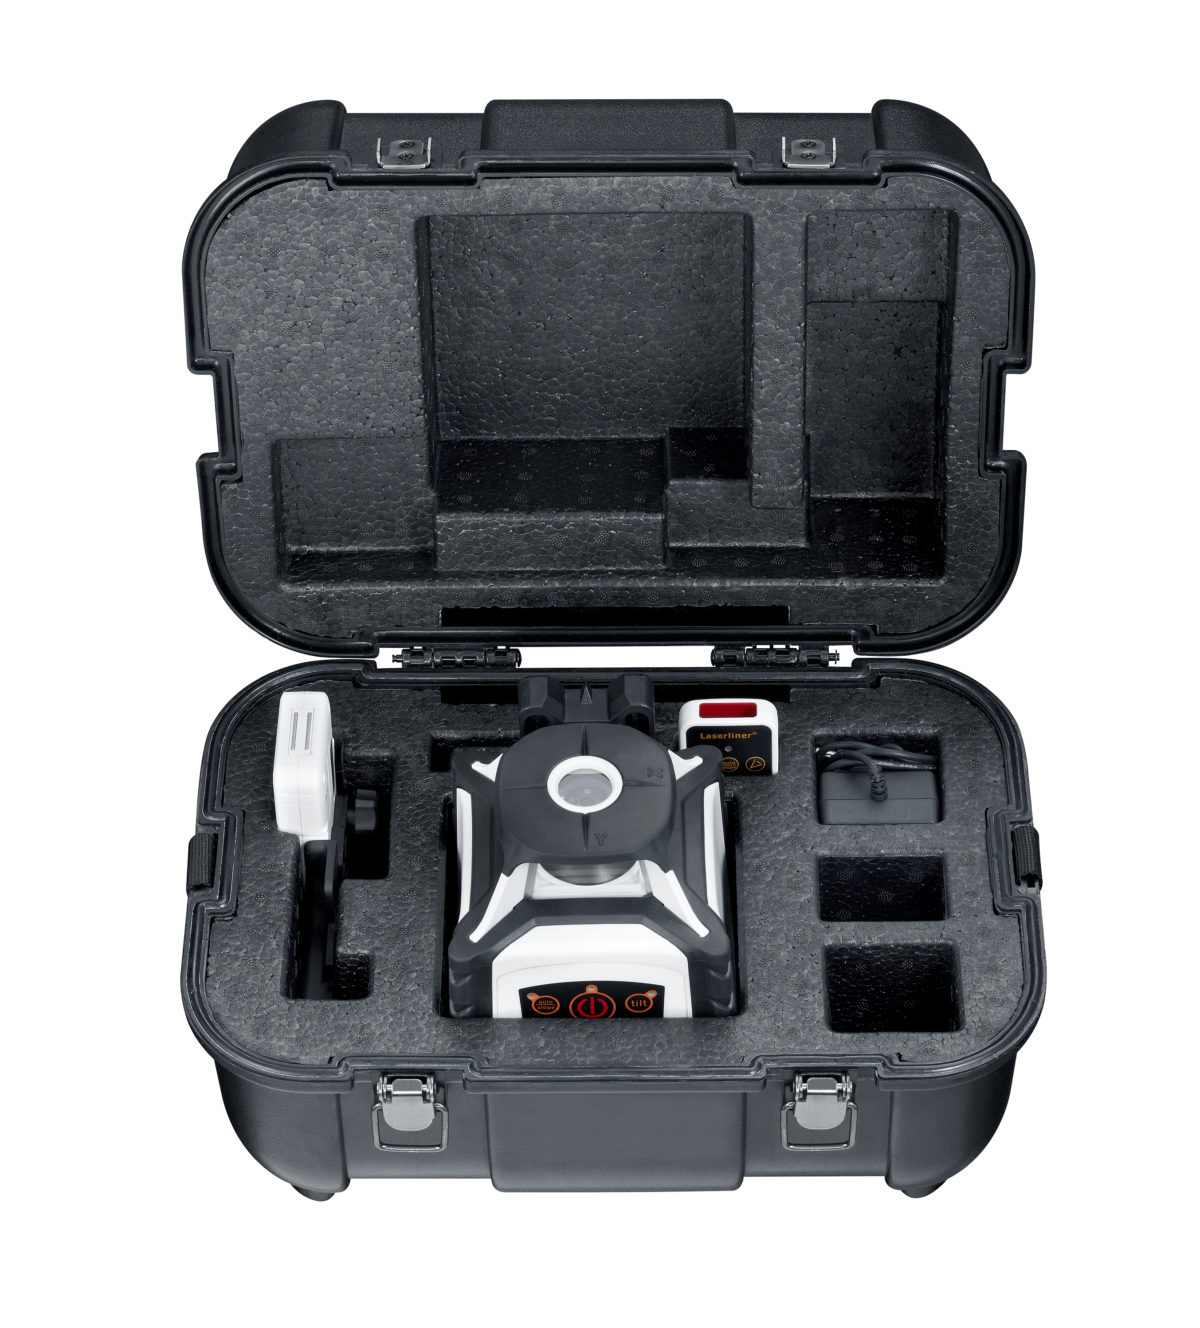 Laserliner Cubus G 310 S - Carry Case